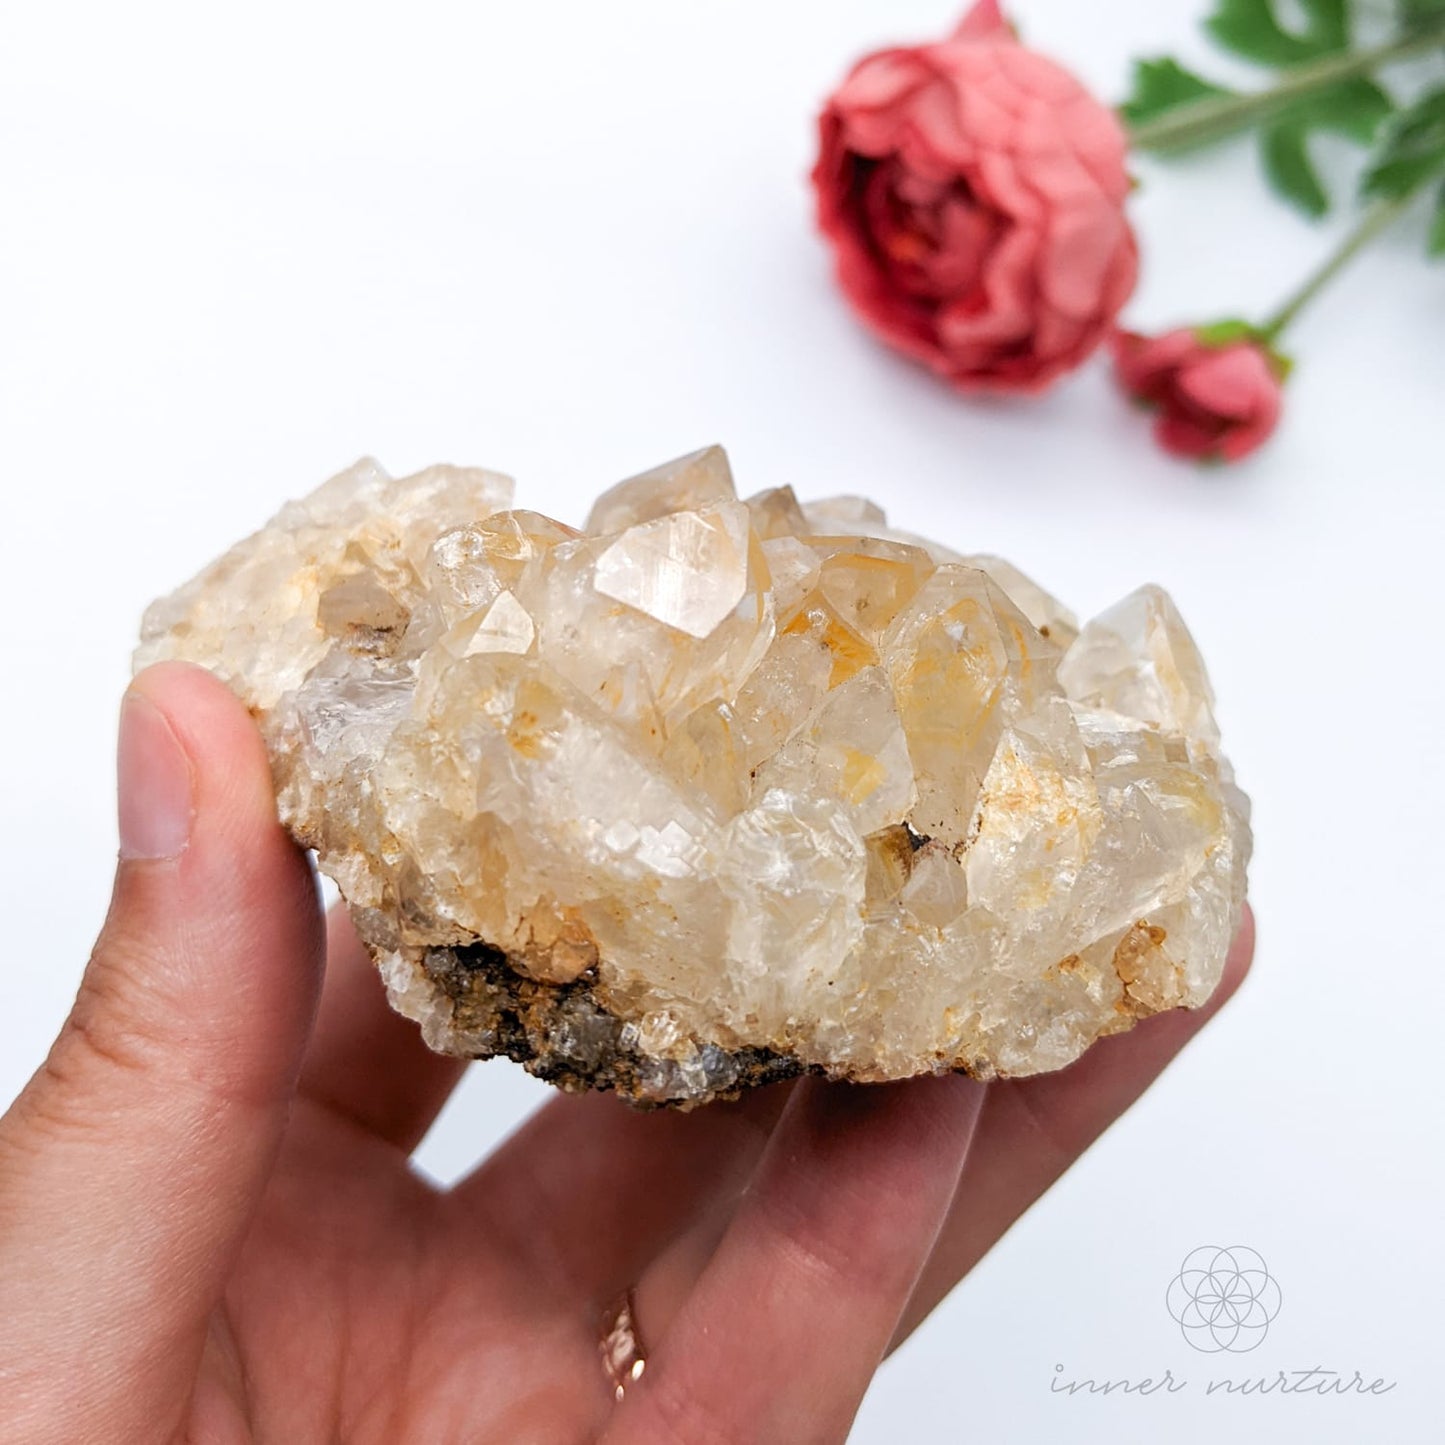 Clear Quartz Cluster With Inclusions - #11 | Crystal Shop Australia - Inner Nurture